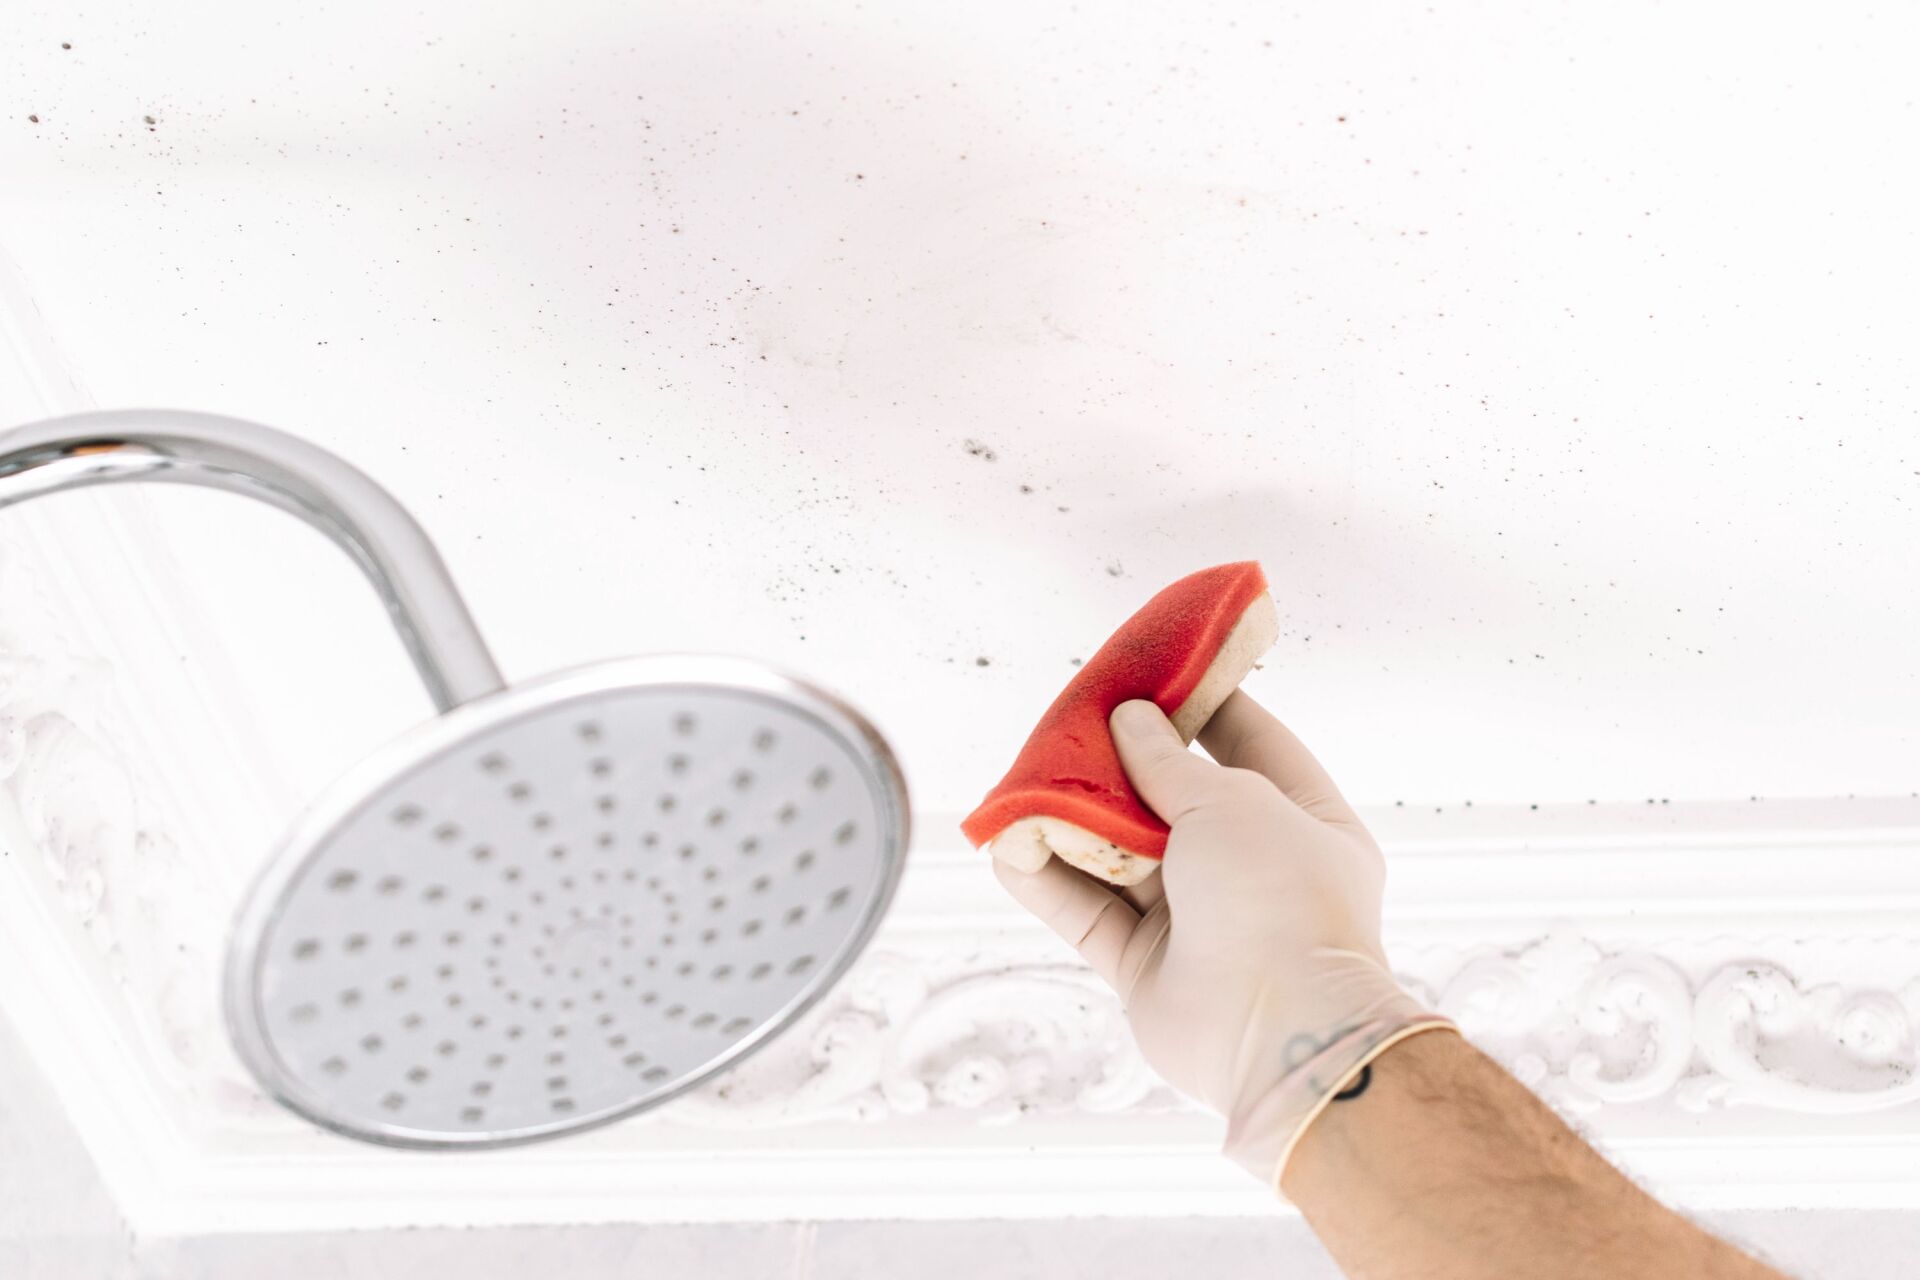 Cleaning Bathroom Mold on Your Own | BioClean NY